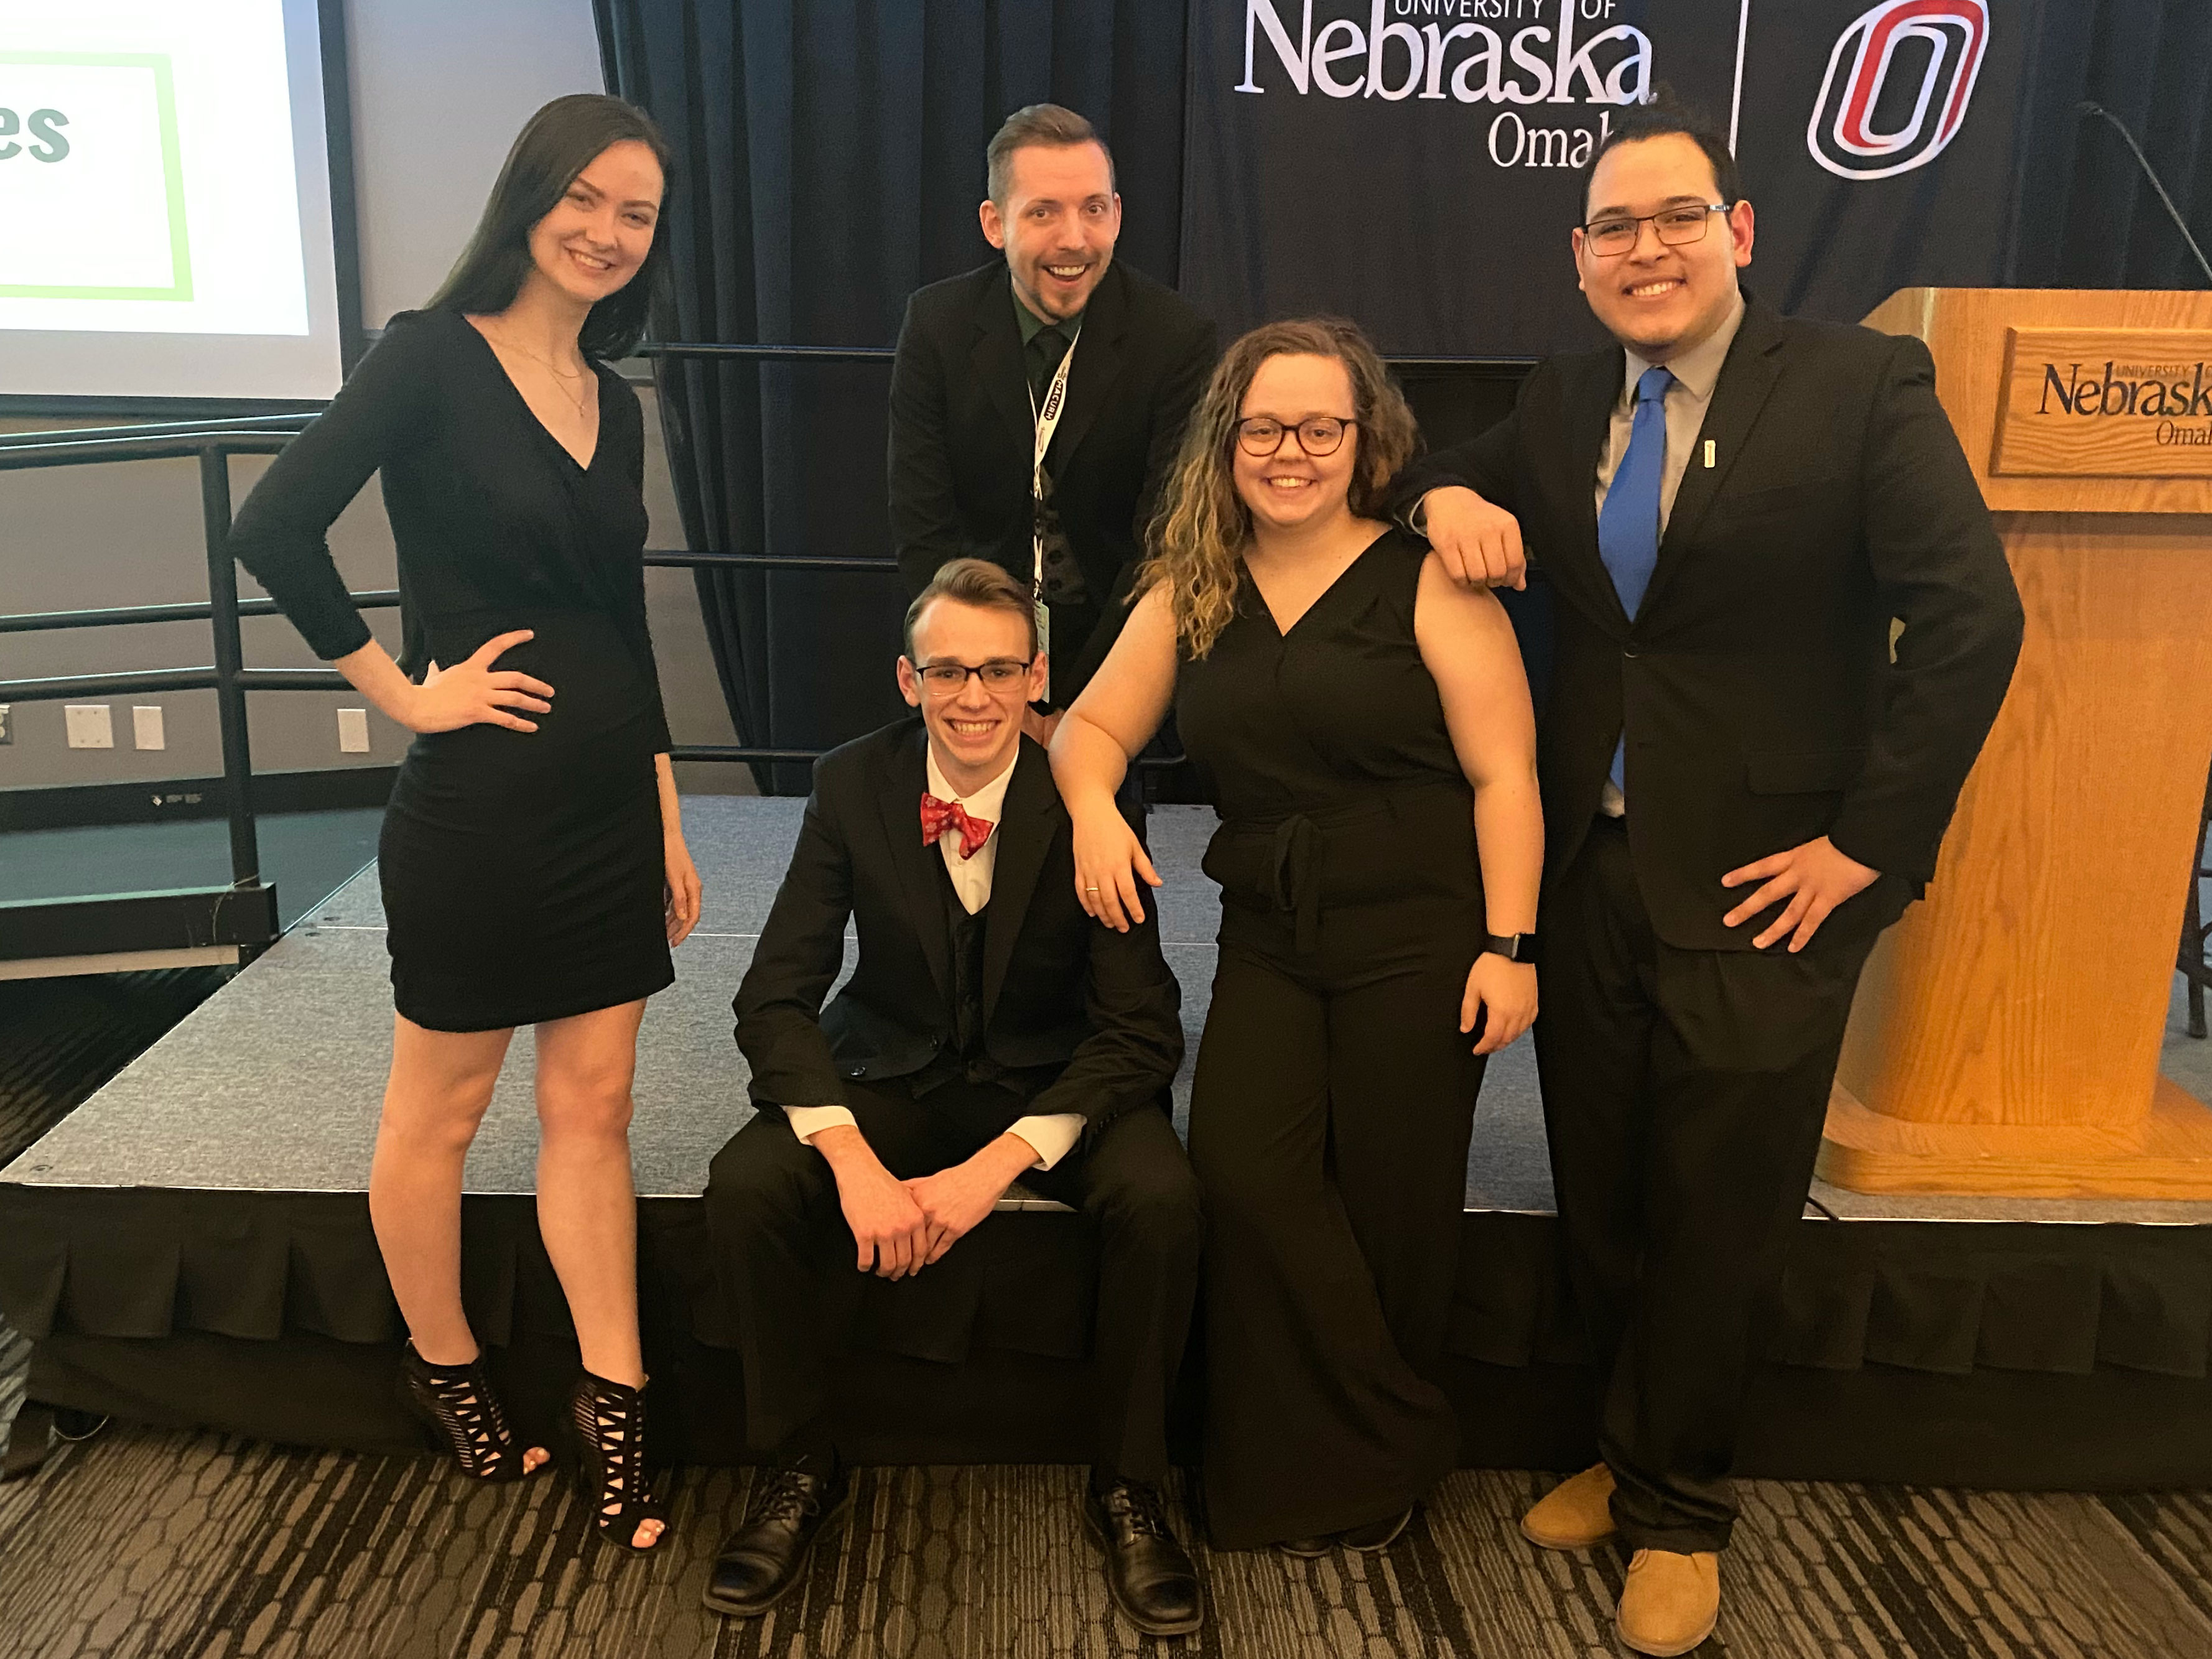 Four student leaders and their advisor represented Nebraska at the Midwest Affiliate of College and University Residence Halls (MACURH) conference in early February.